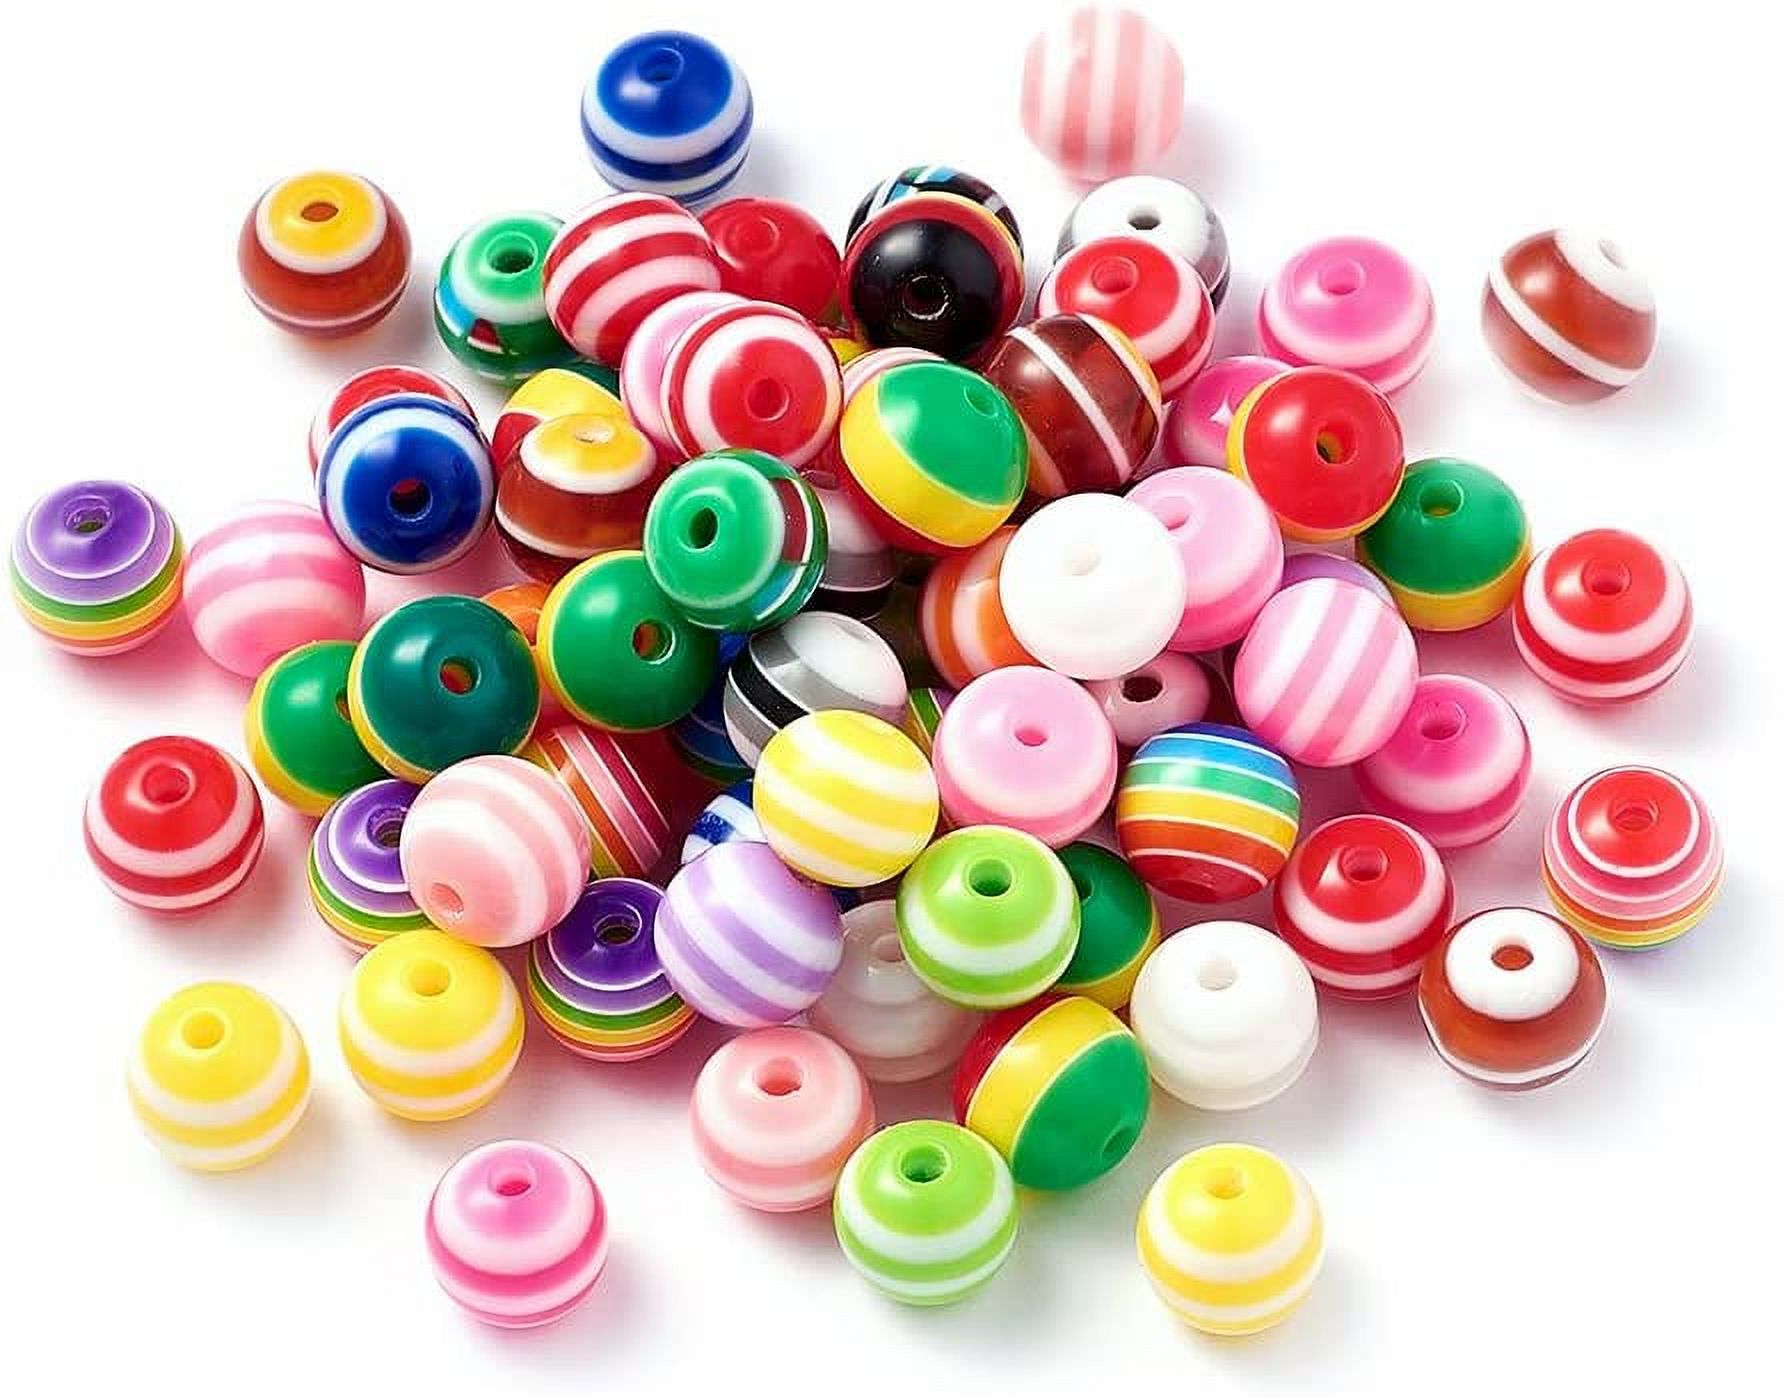 100-piece Assorted Color 8mm/0.31inch Round Striped Acrylic Resin